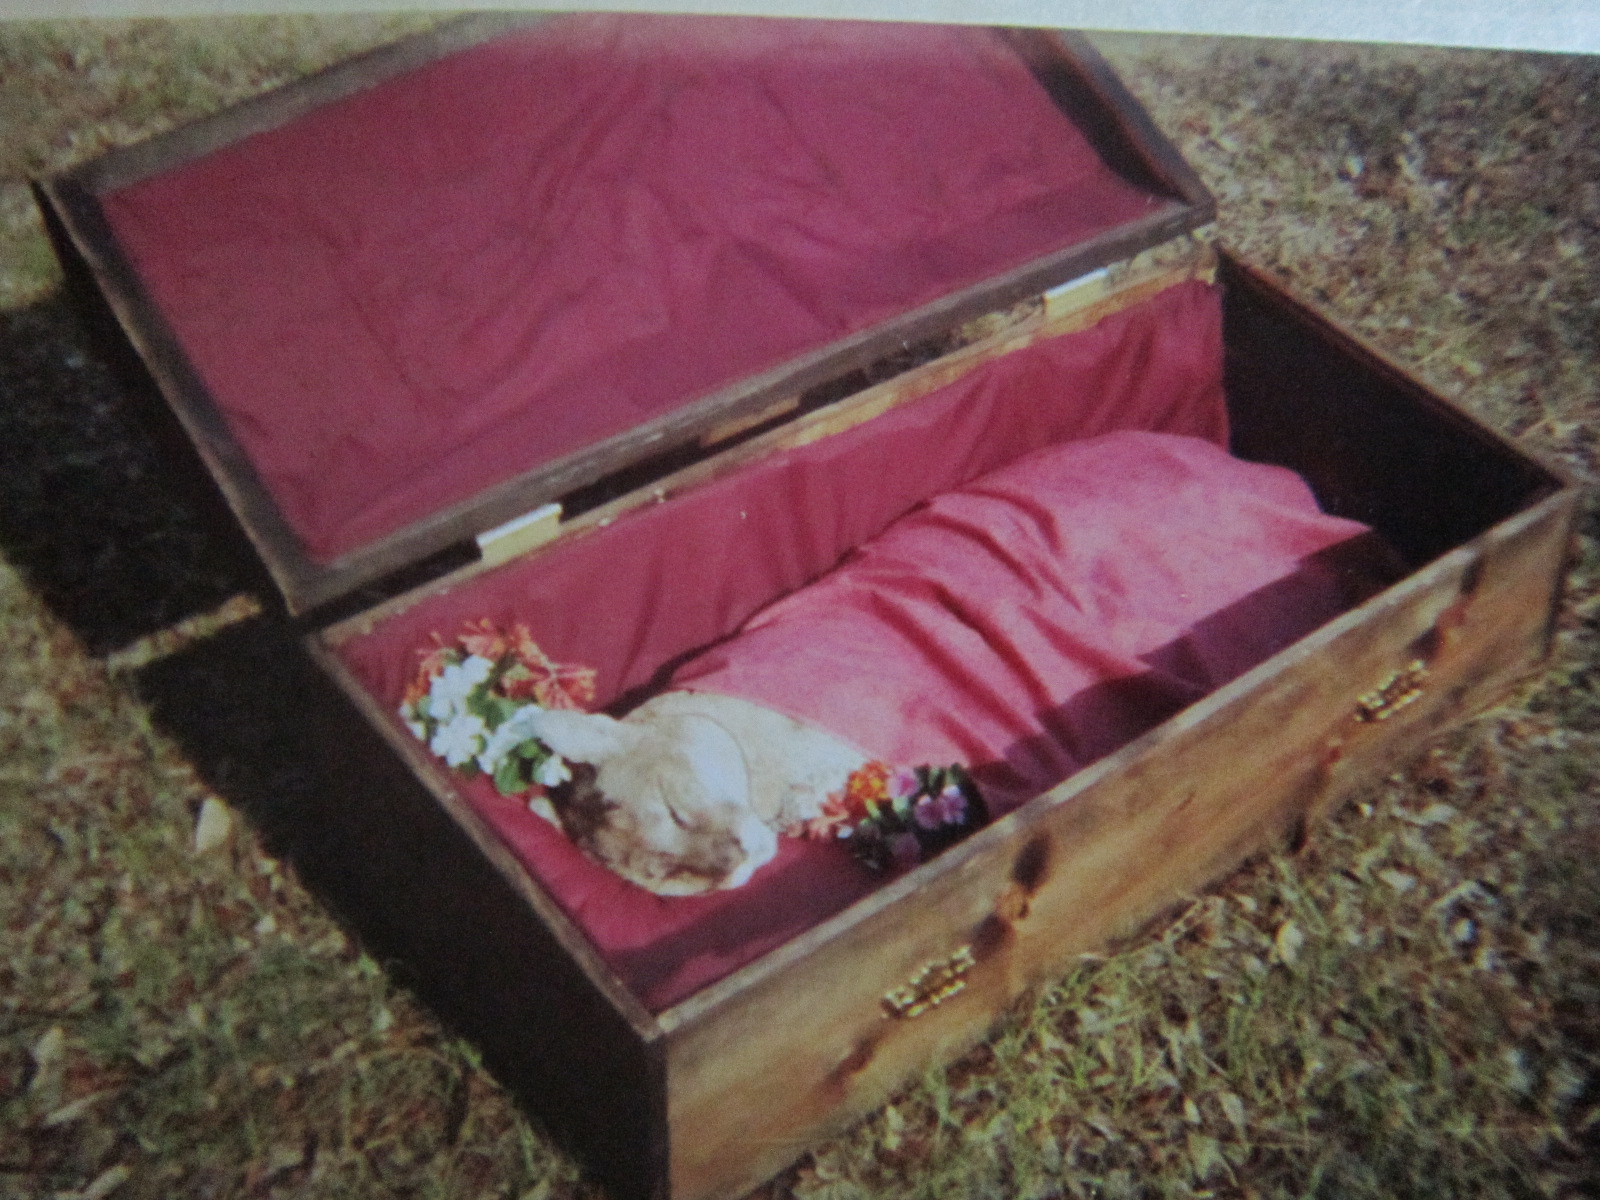 Daisy's funeral